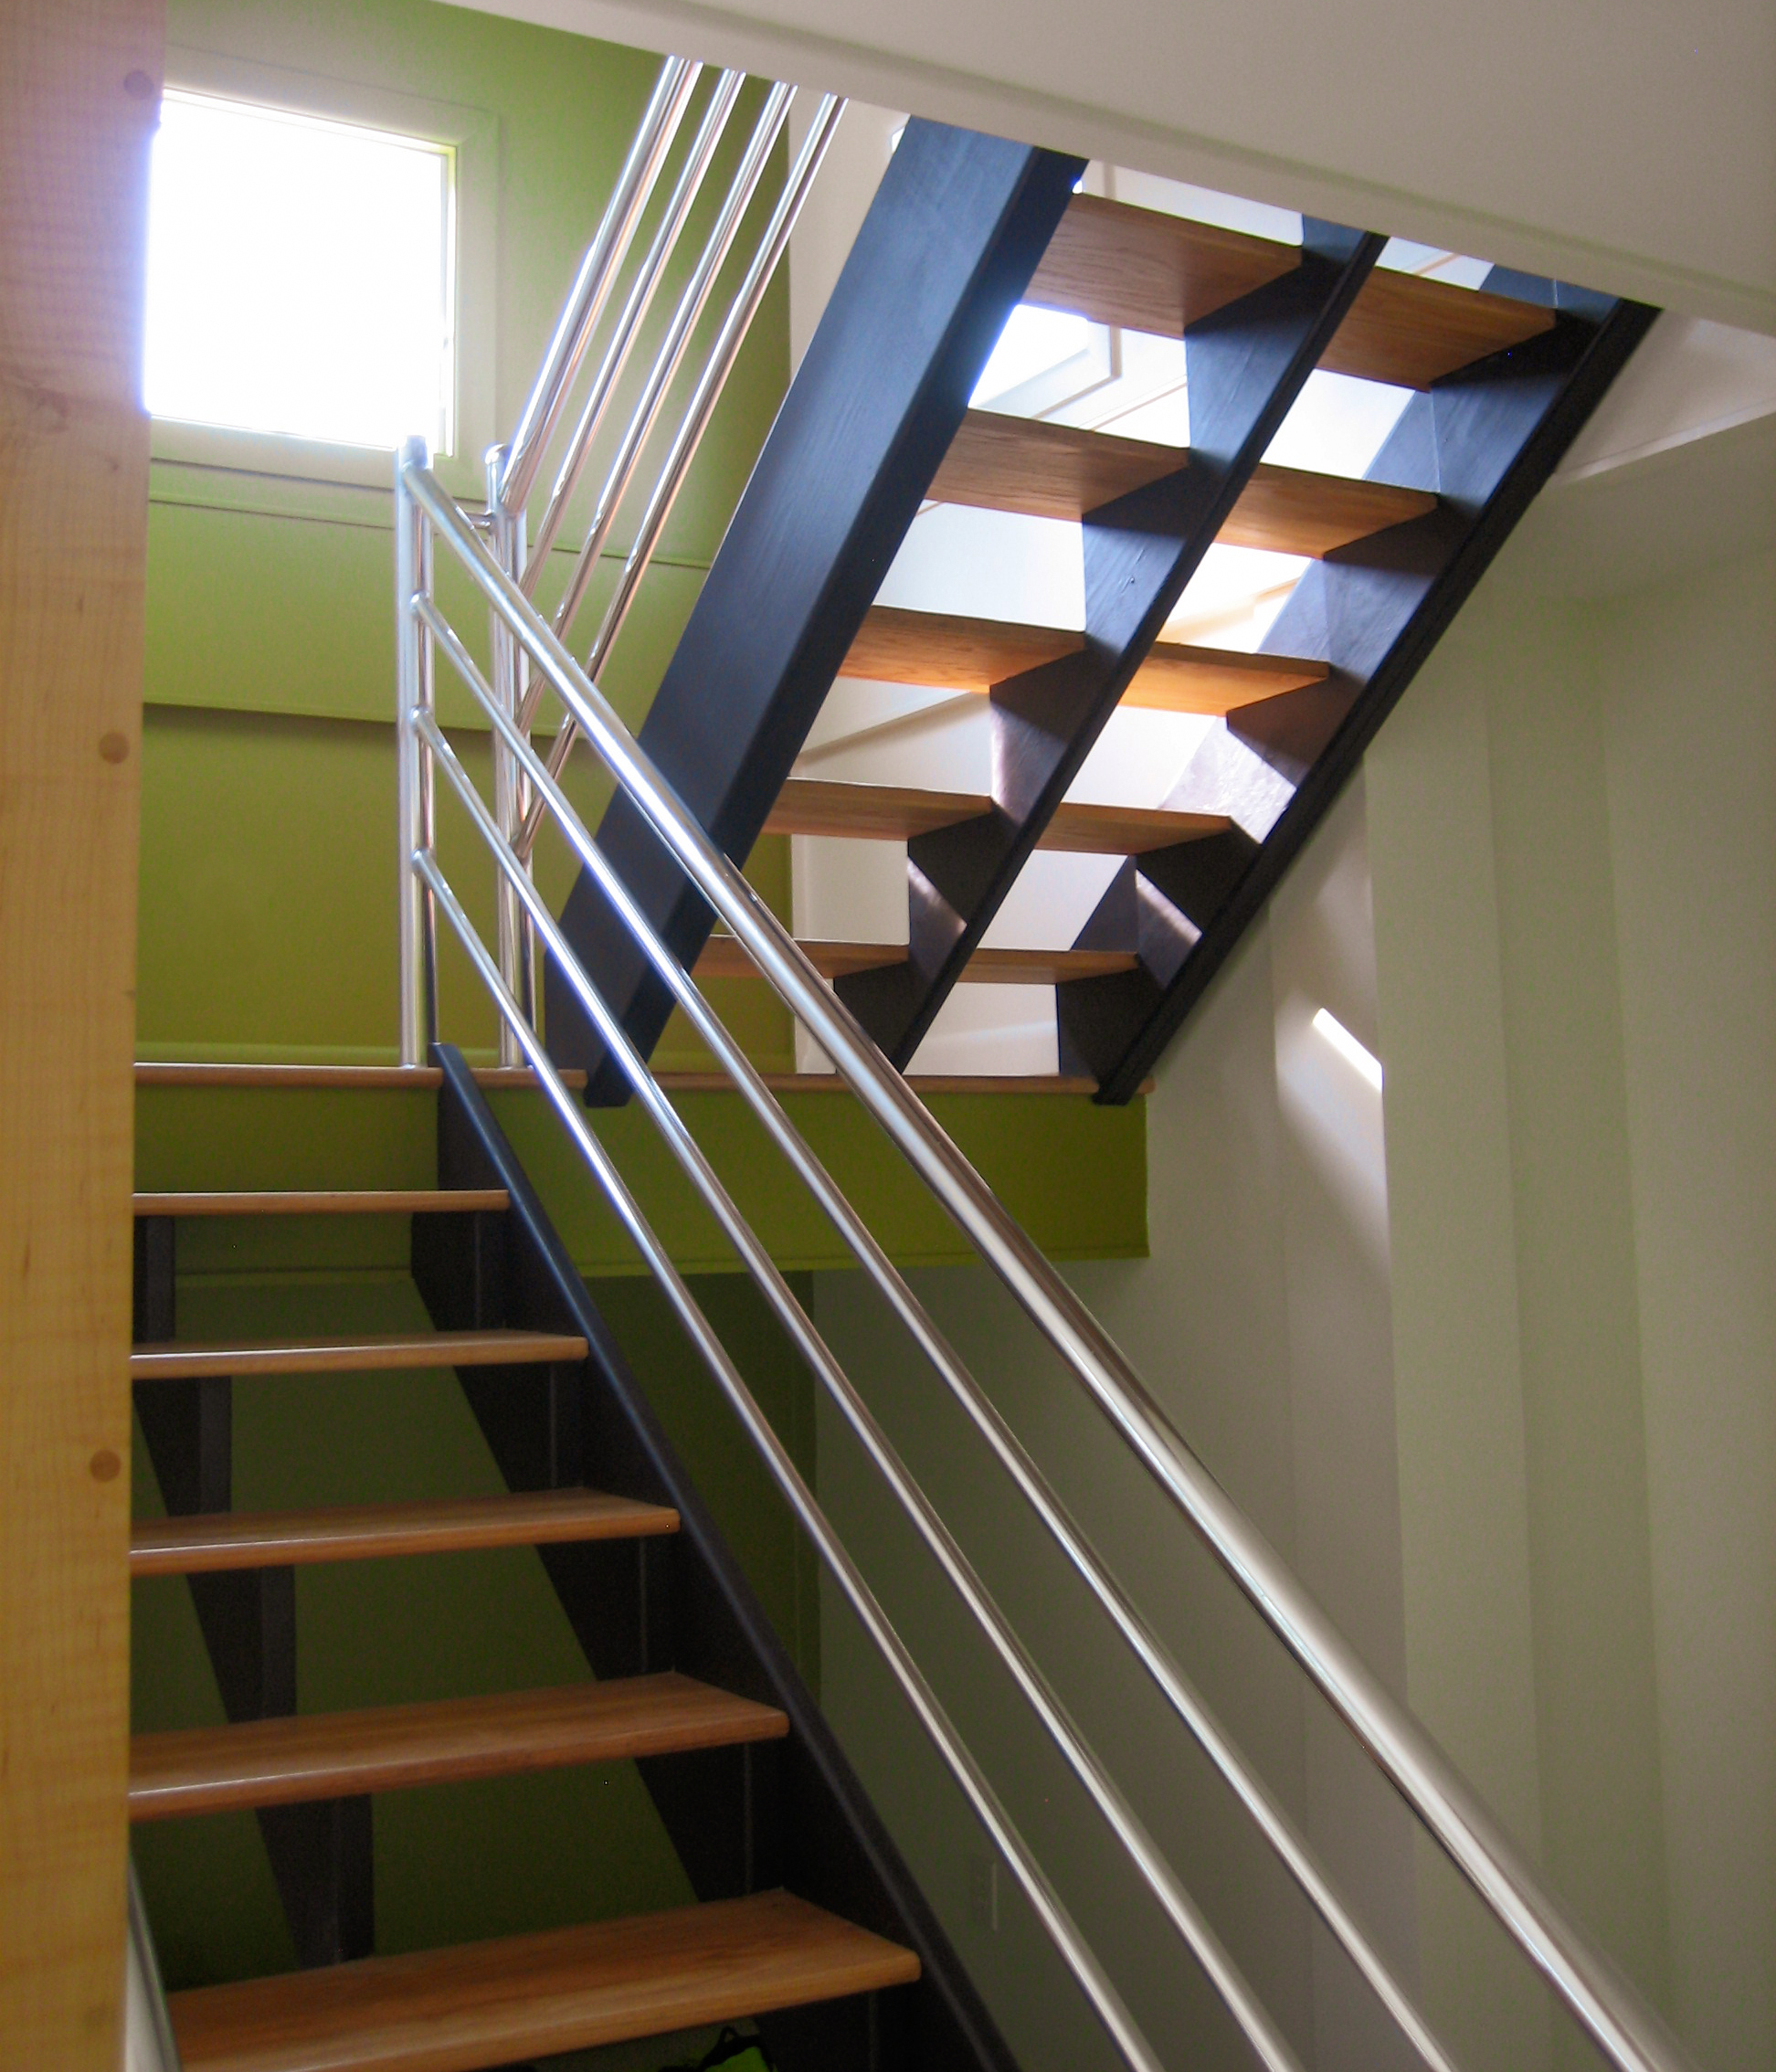 Sleek stairwell with stainless steel railing, chartreuse walls, and open riser stairs